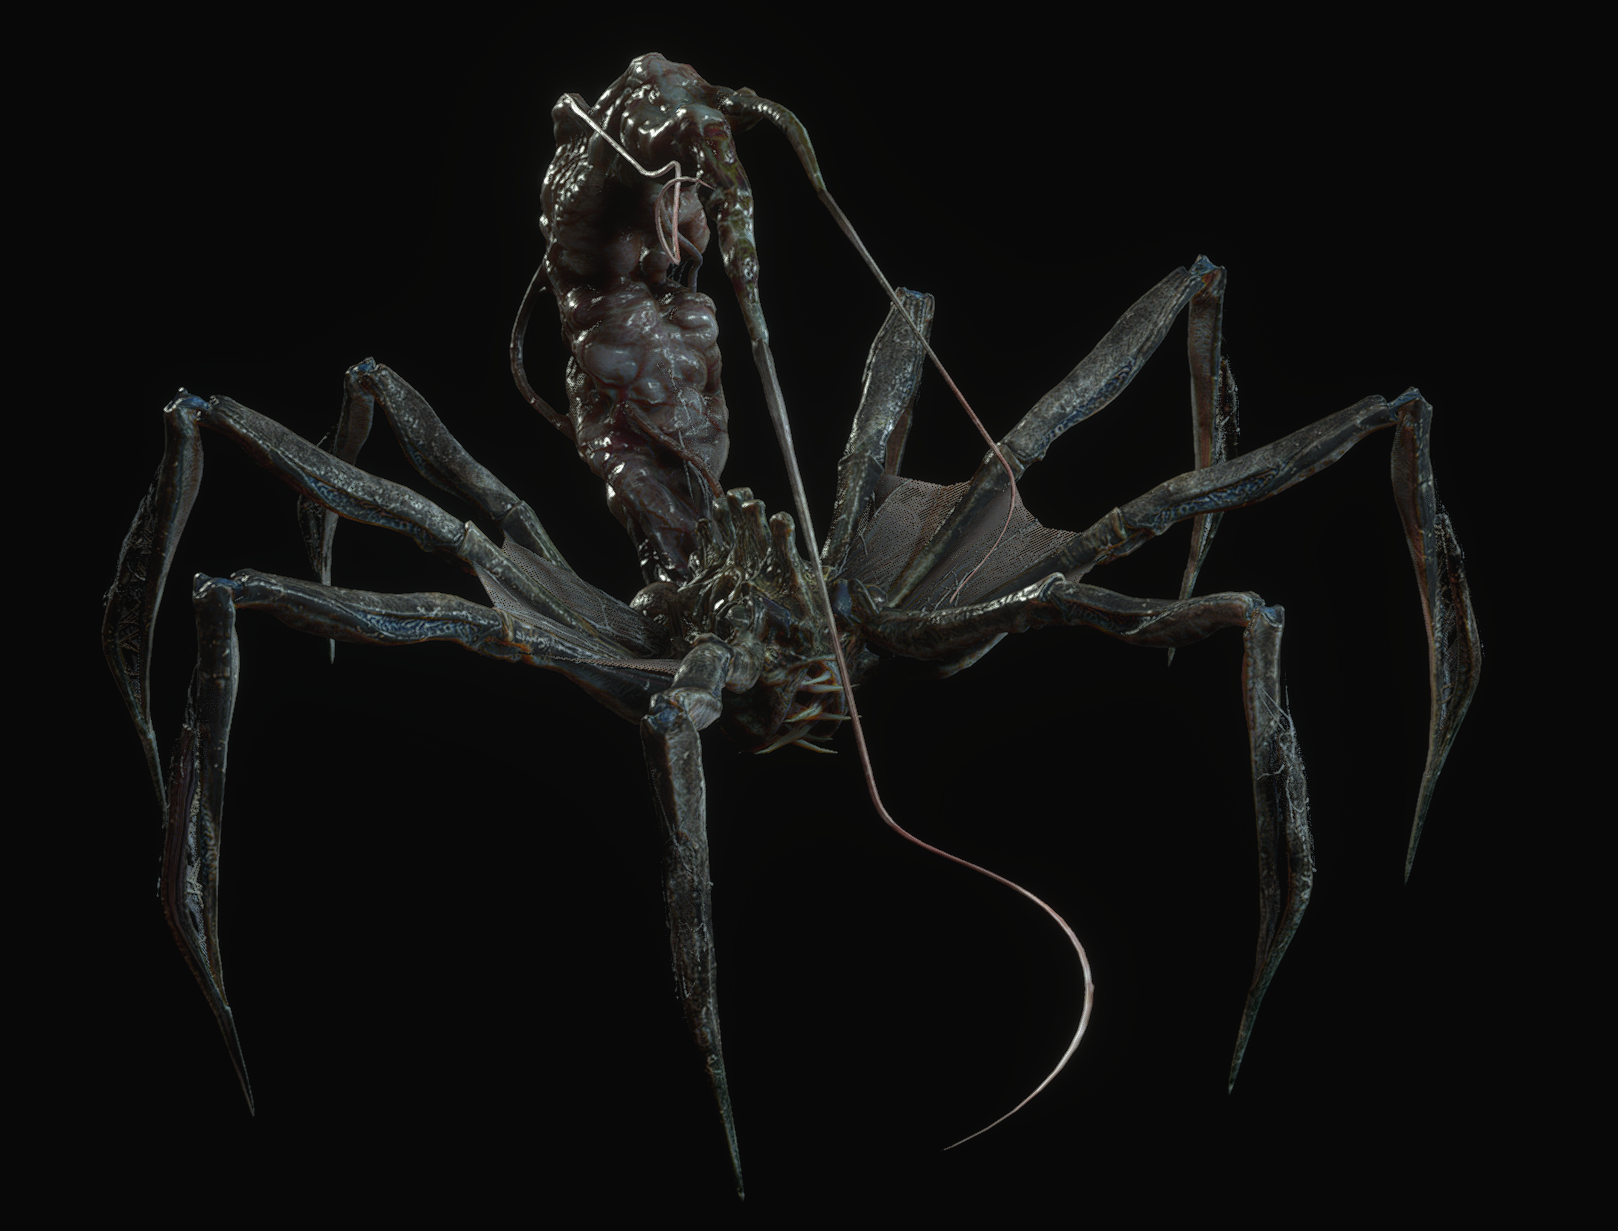 parasitic worms in spiders